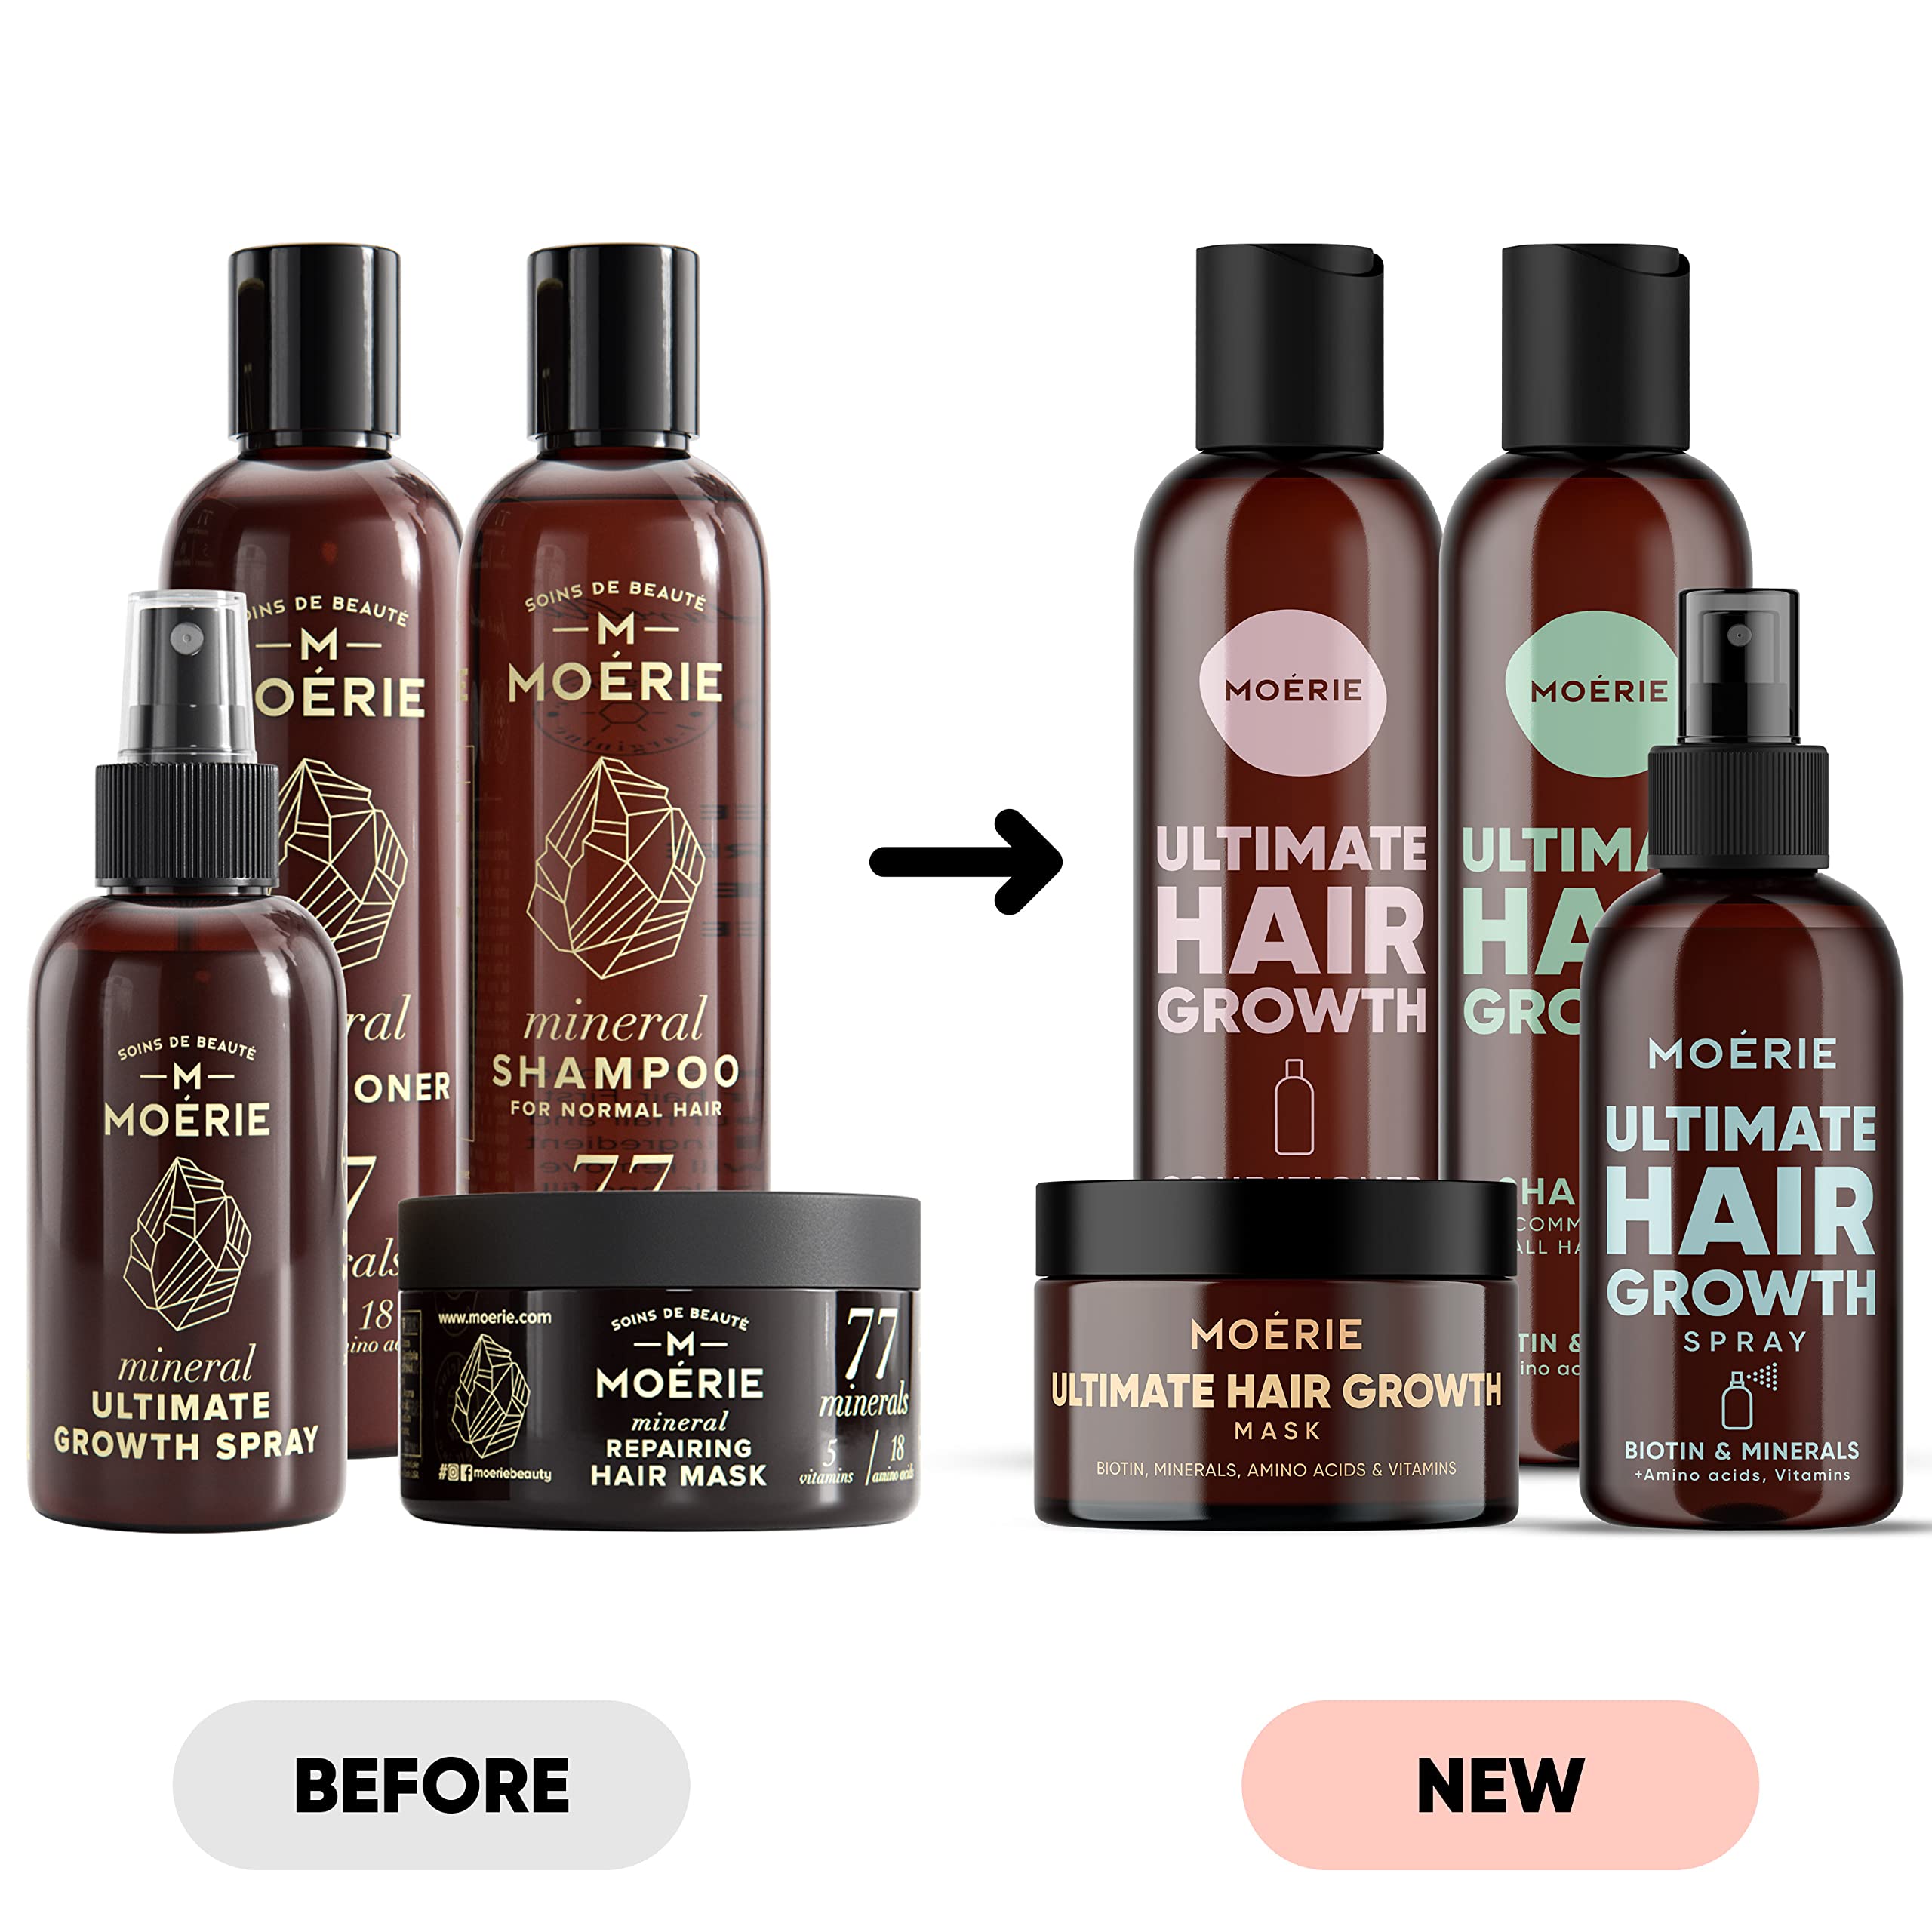 Moerie Shampoo and Conditioner Plus Hair Mask and Hair Spray Mega Pack – The Ultimate Hair Growth Care – For Longer, Thicker, Fuller Hair - Volumizing Hair Products – Paraben & Silicone Free - 4 items